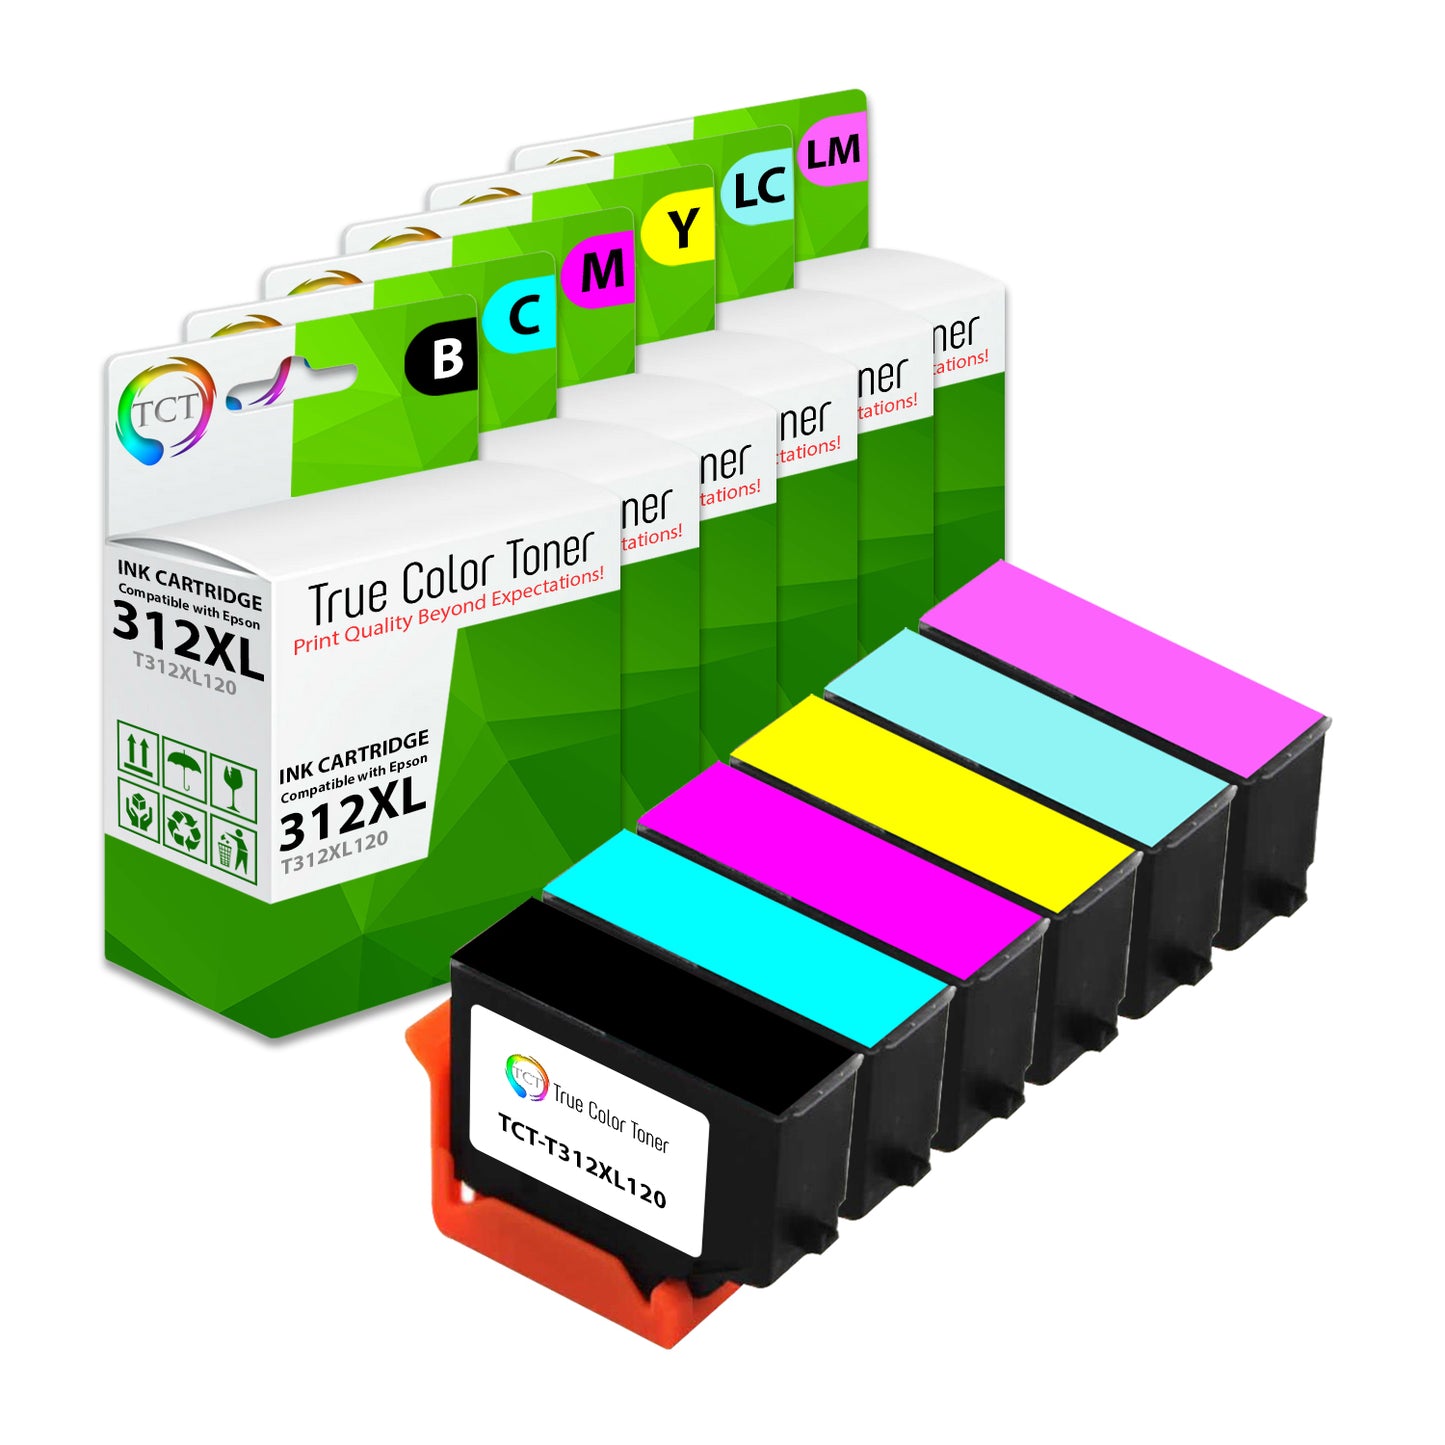 TCT Remanufactured HY Ink Cartridge Replacement for the Epson 312XL Series - 6 Pack (B, C, M, Y)